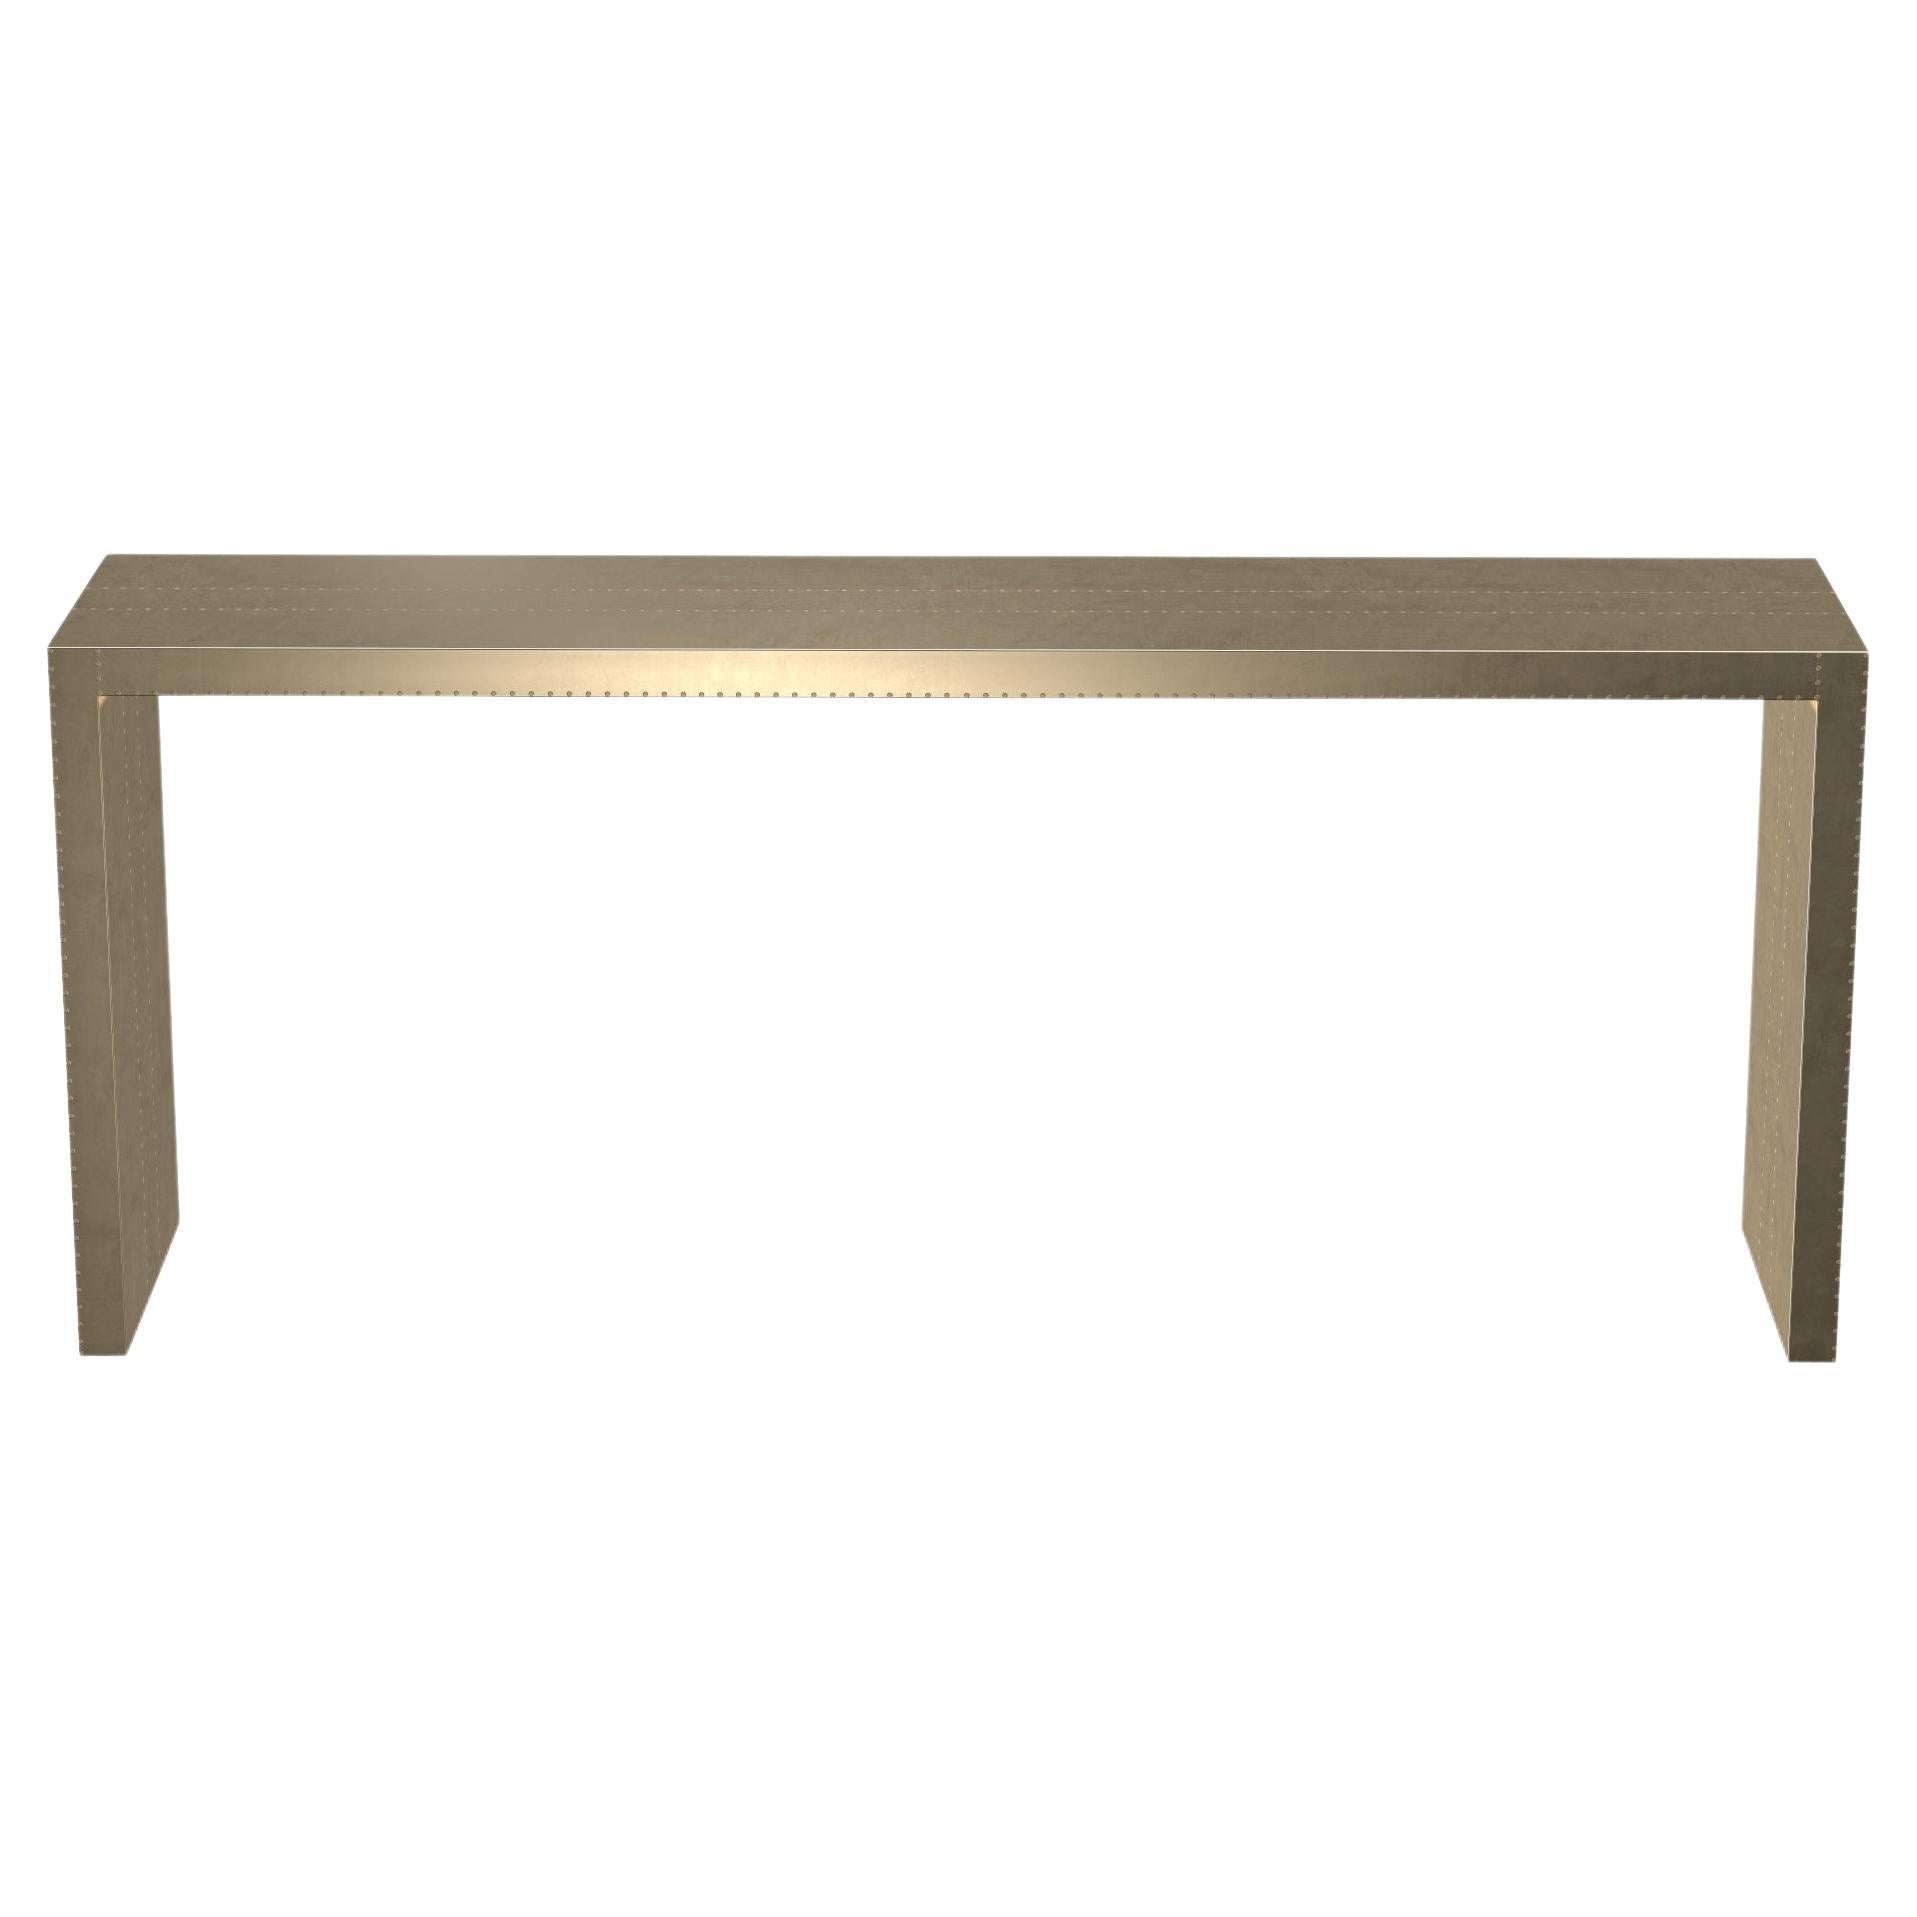 Art Nouveau Tray Tables Rectangular Console in Smooth Brass by Alison Spear